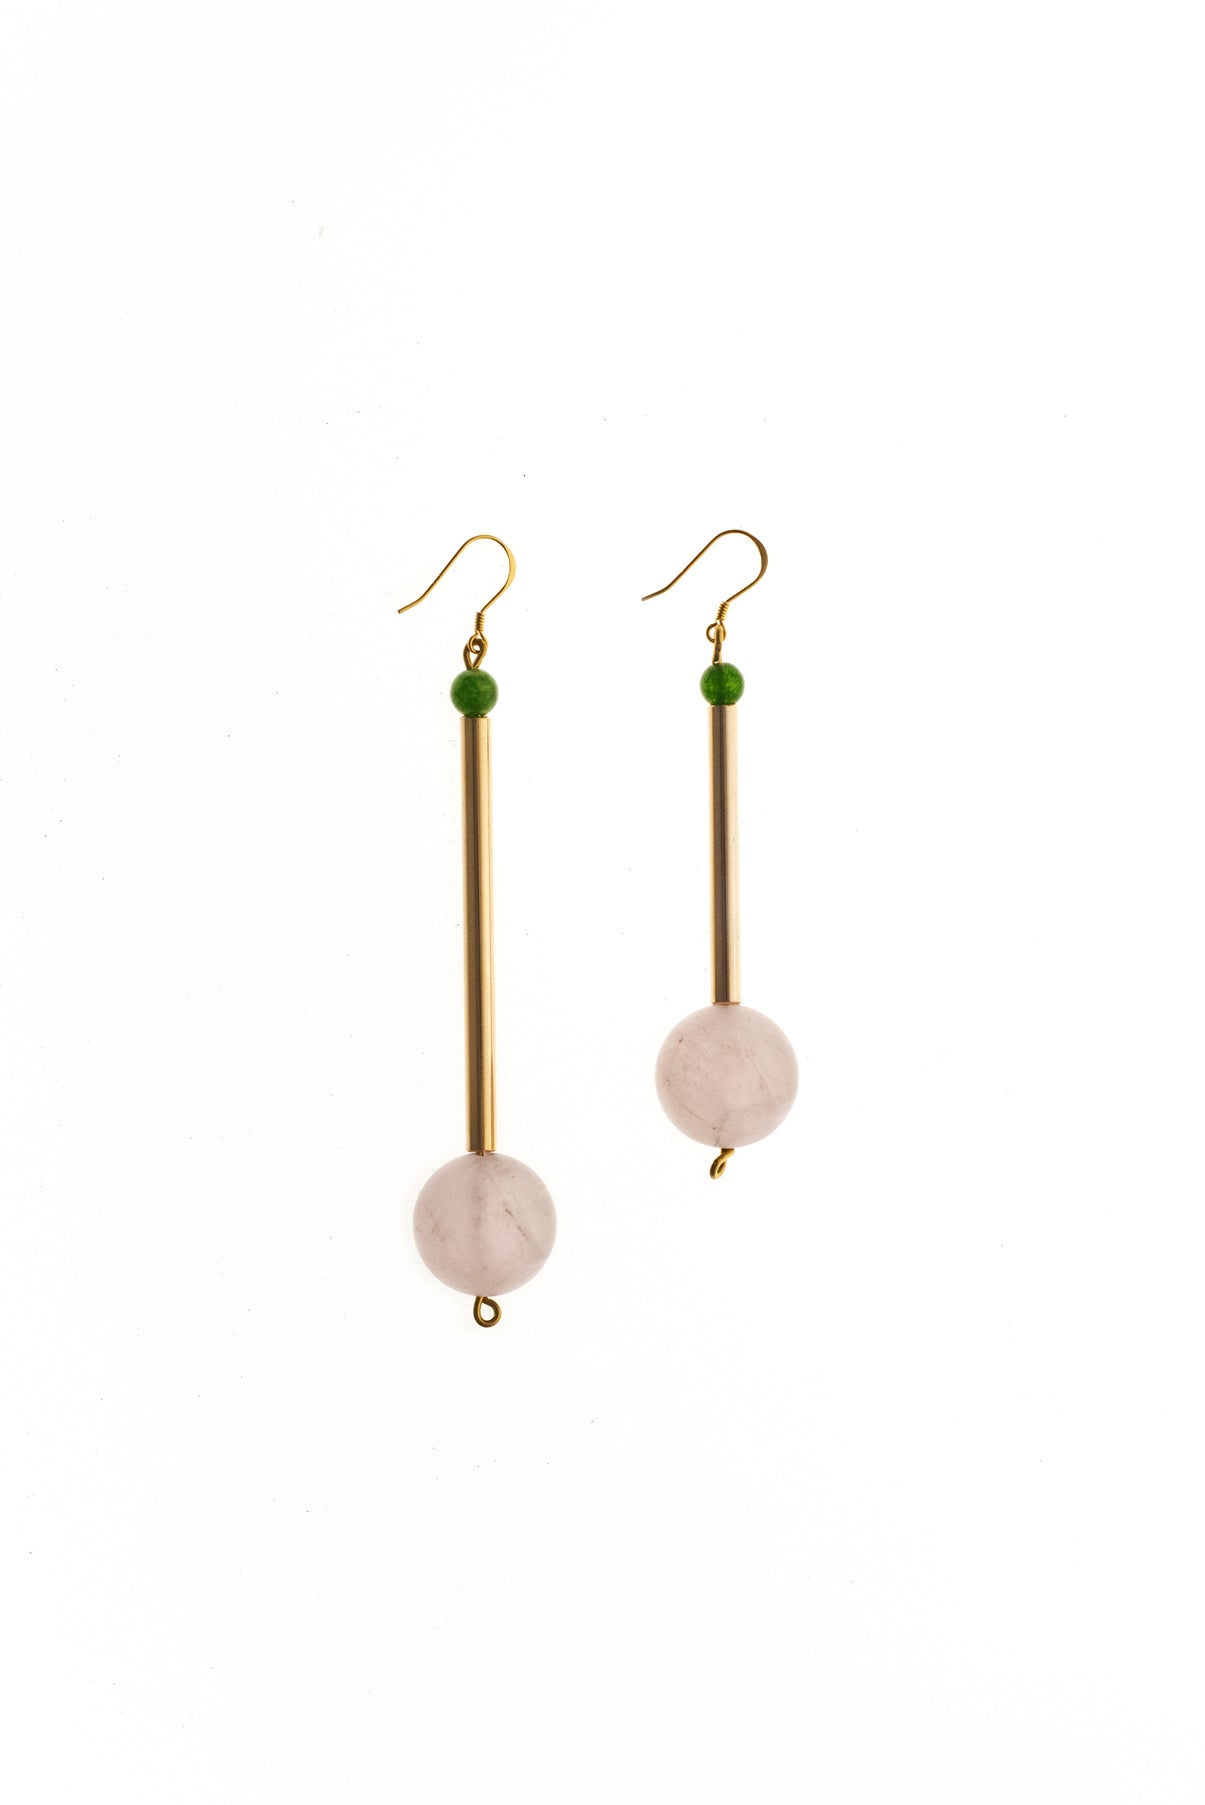 Bellevue earrings made of hand-cut, hand polished and galvanized brass, amethyst, jade and gold plated sterling silver.